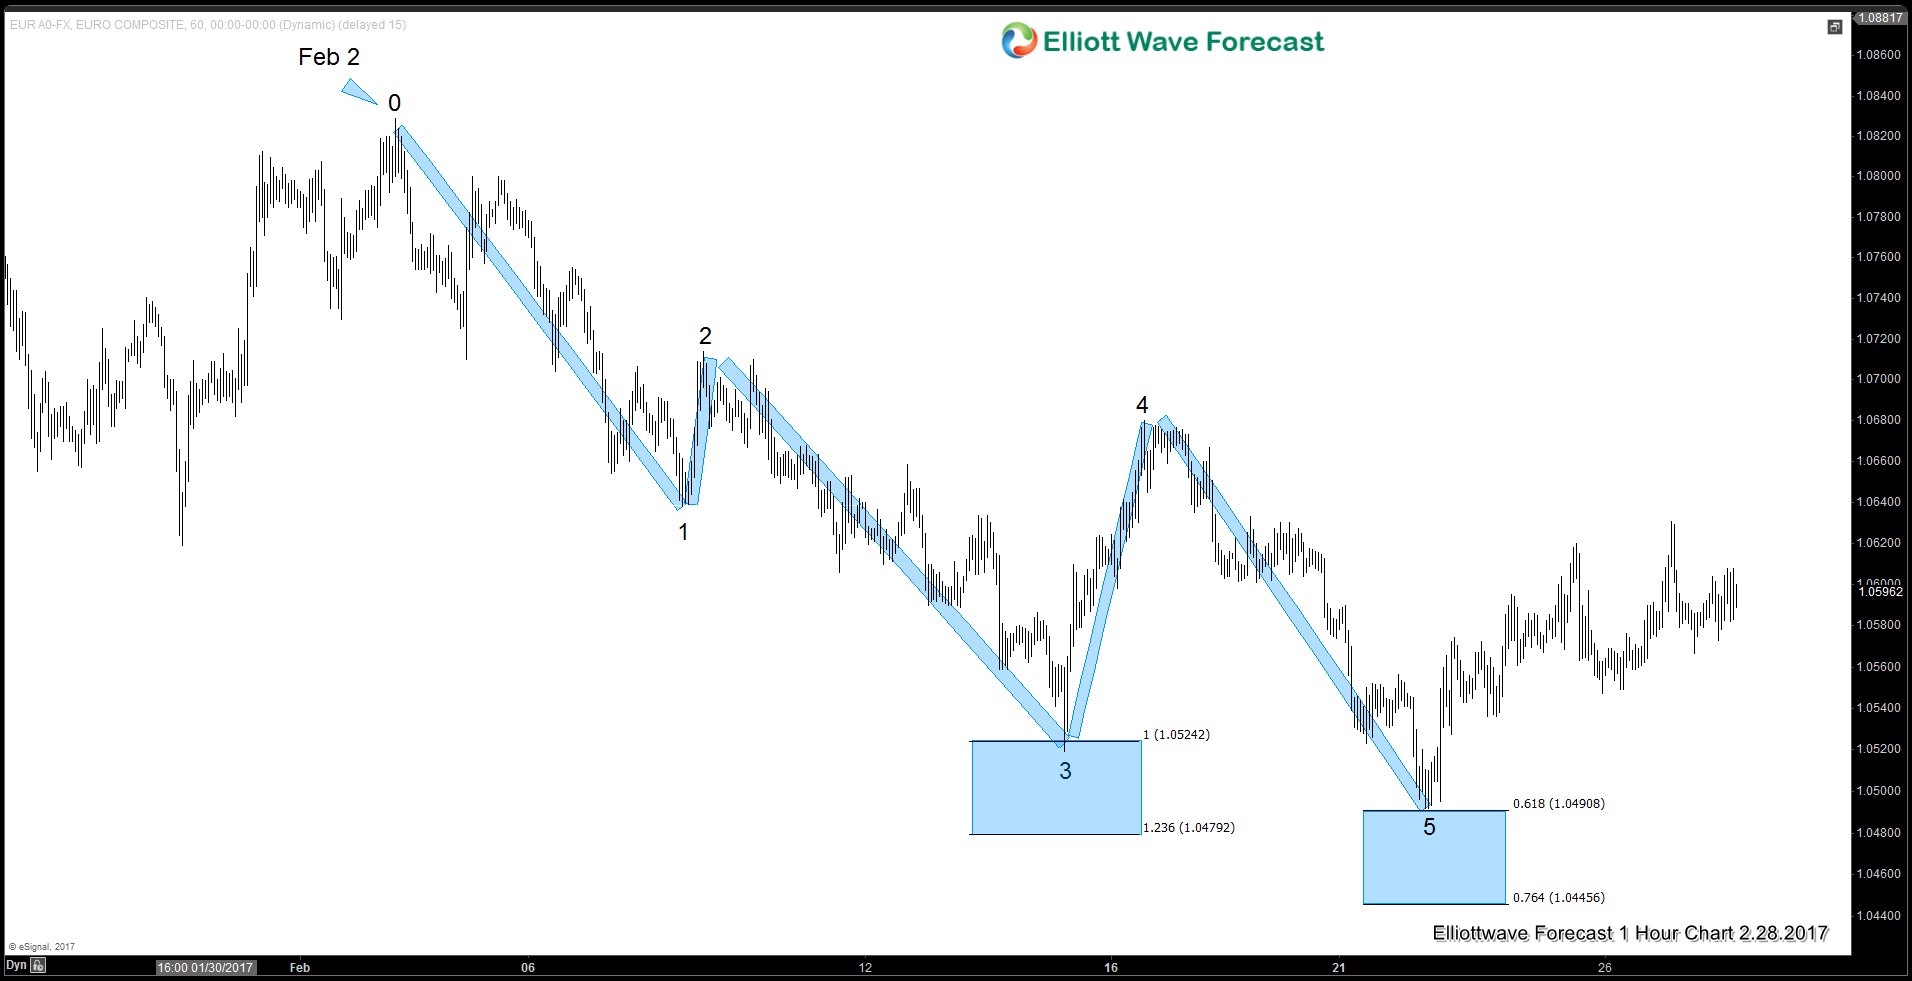 EURUSD: Euro area elections may limit strength